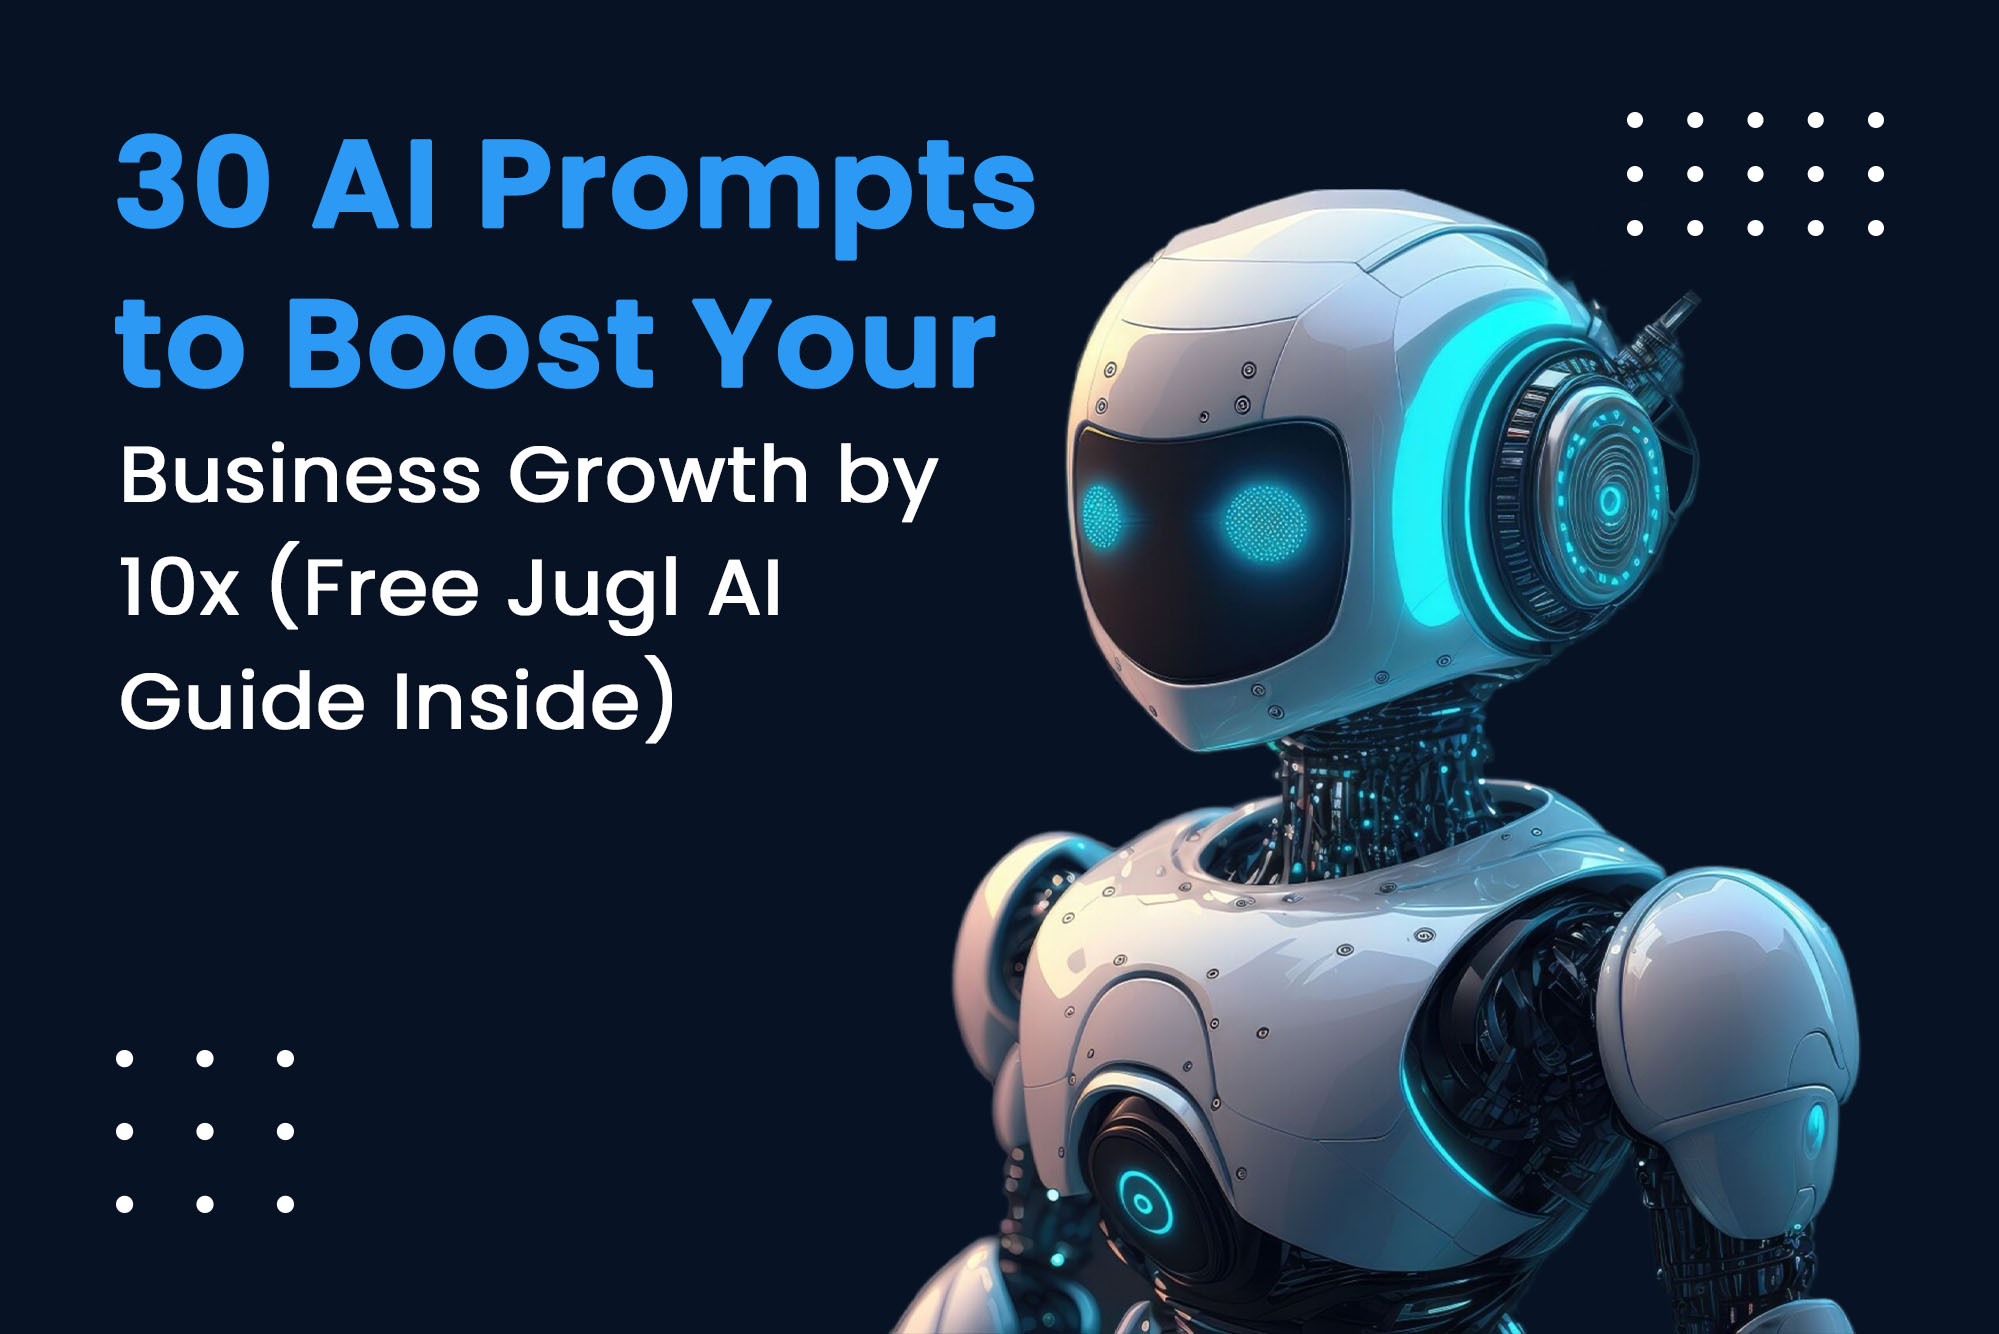 30 AI Prompts to Boost Your Business Growth by 10x (Free Jugl AI Guide Inside)